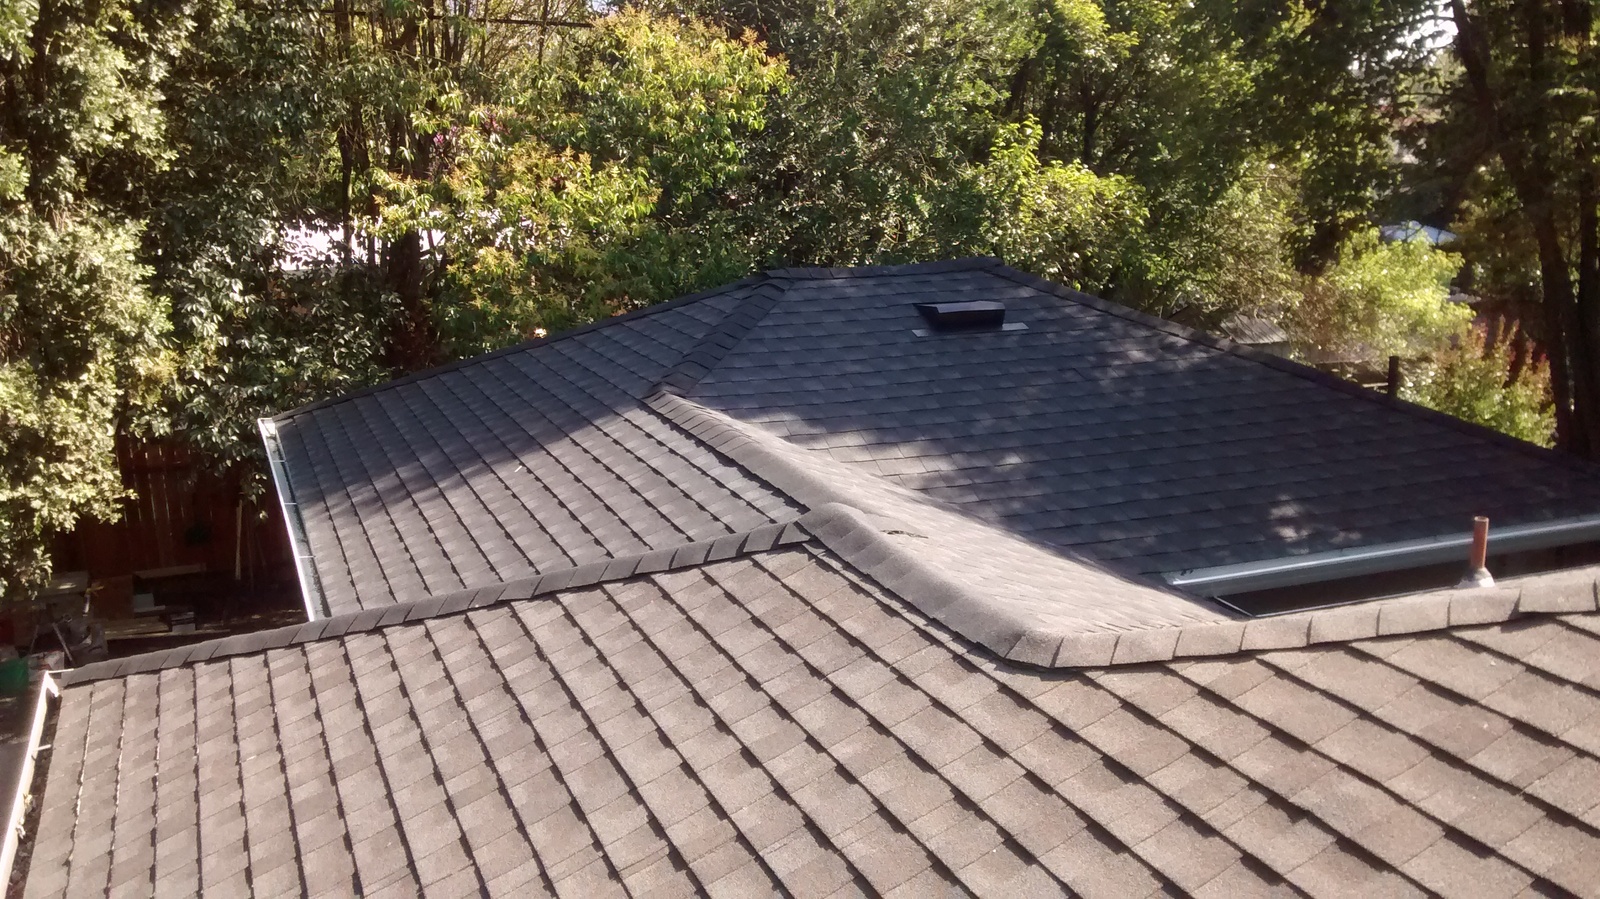 Sonoma Ave Roof finished